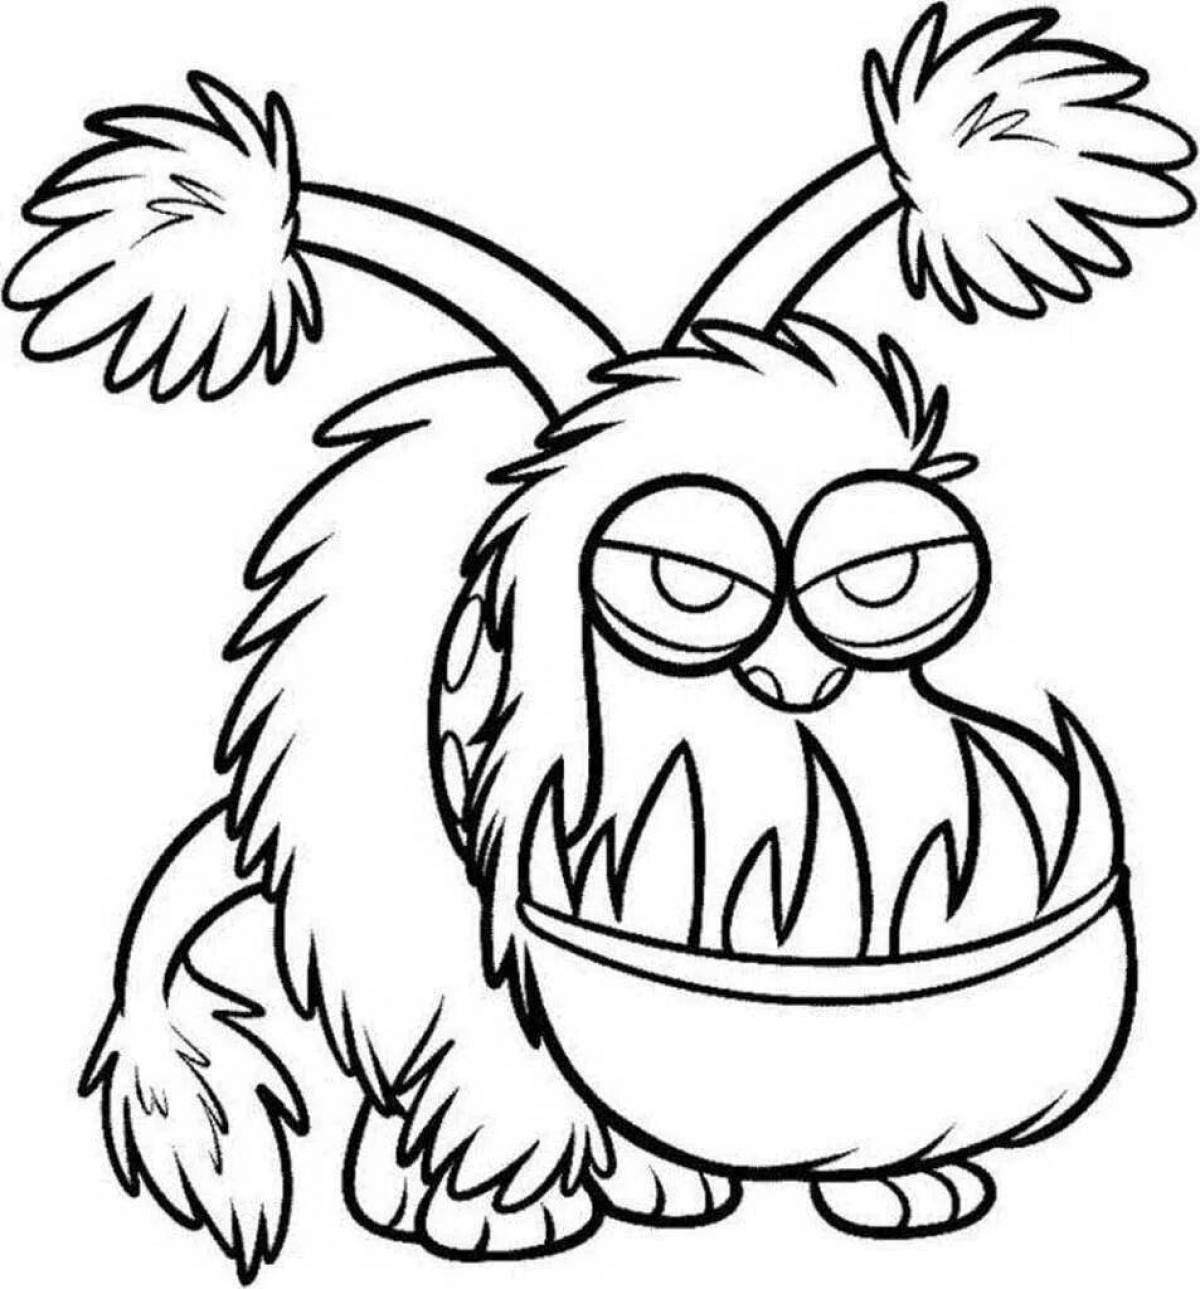 Zany critter coloring page